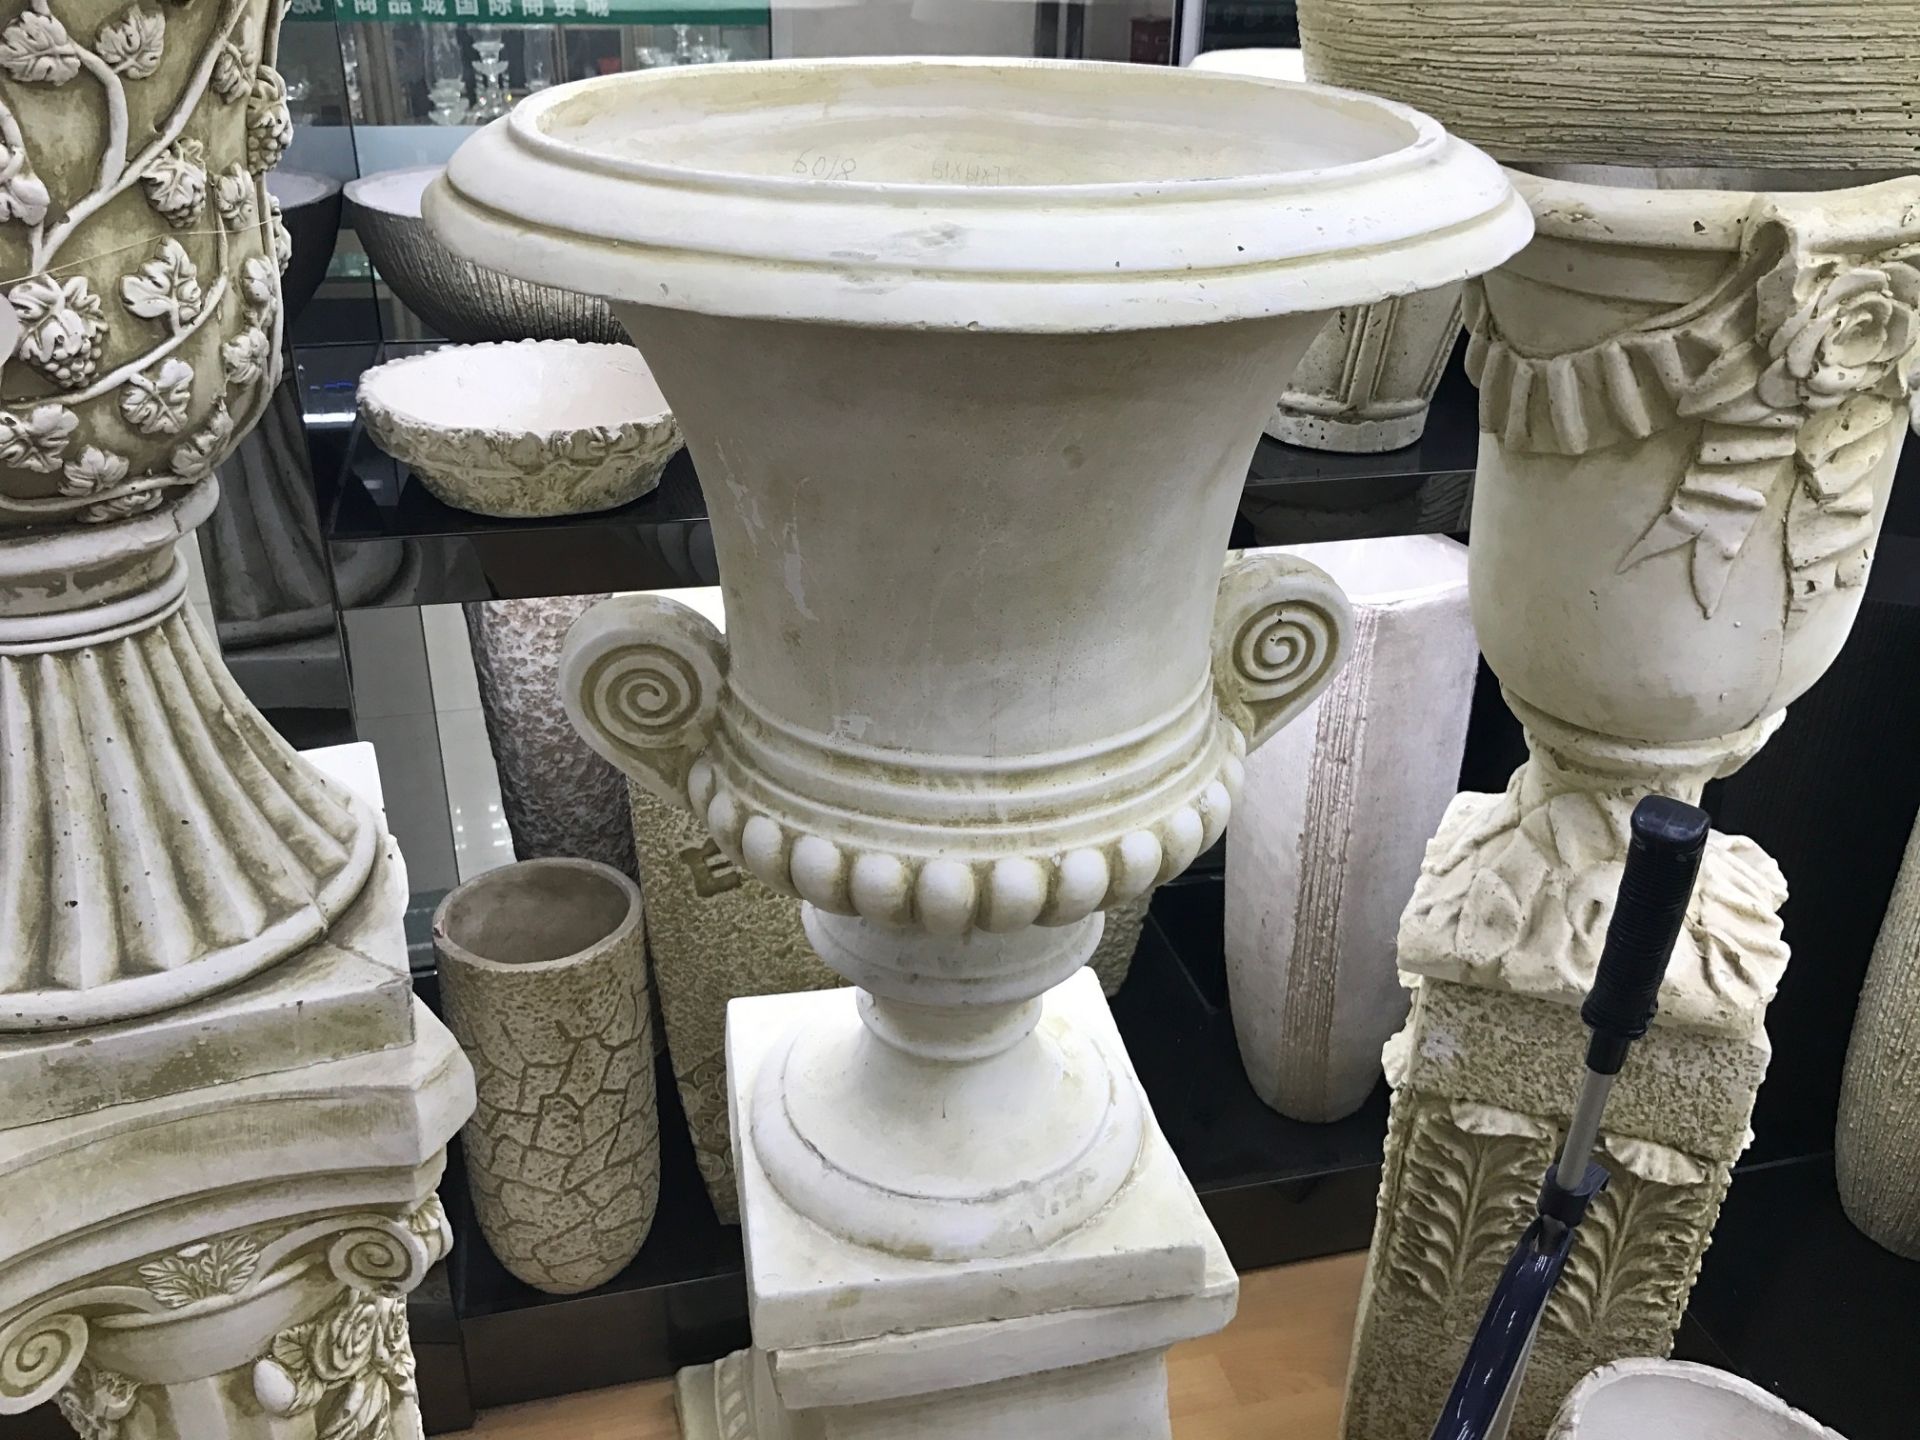 LARGE NEW CRATED URN IN ANTIQUE WHITE FINISH